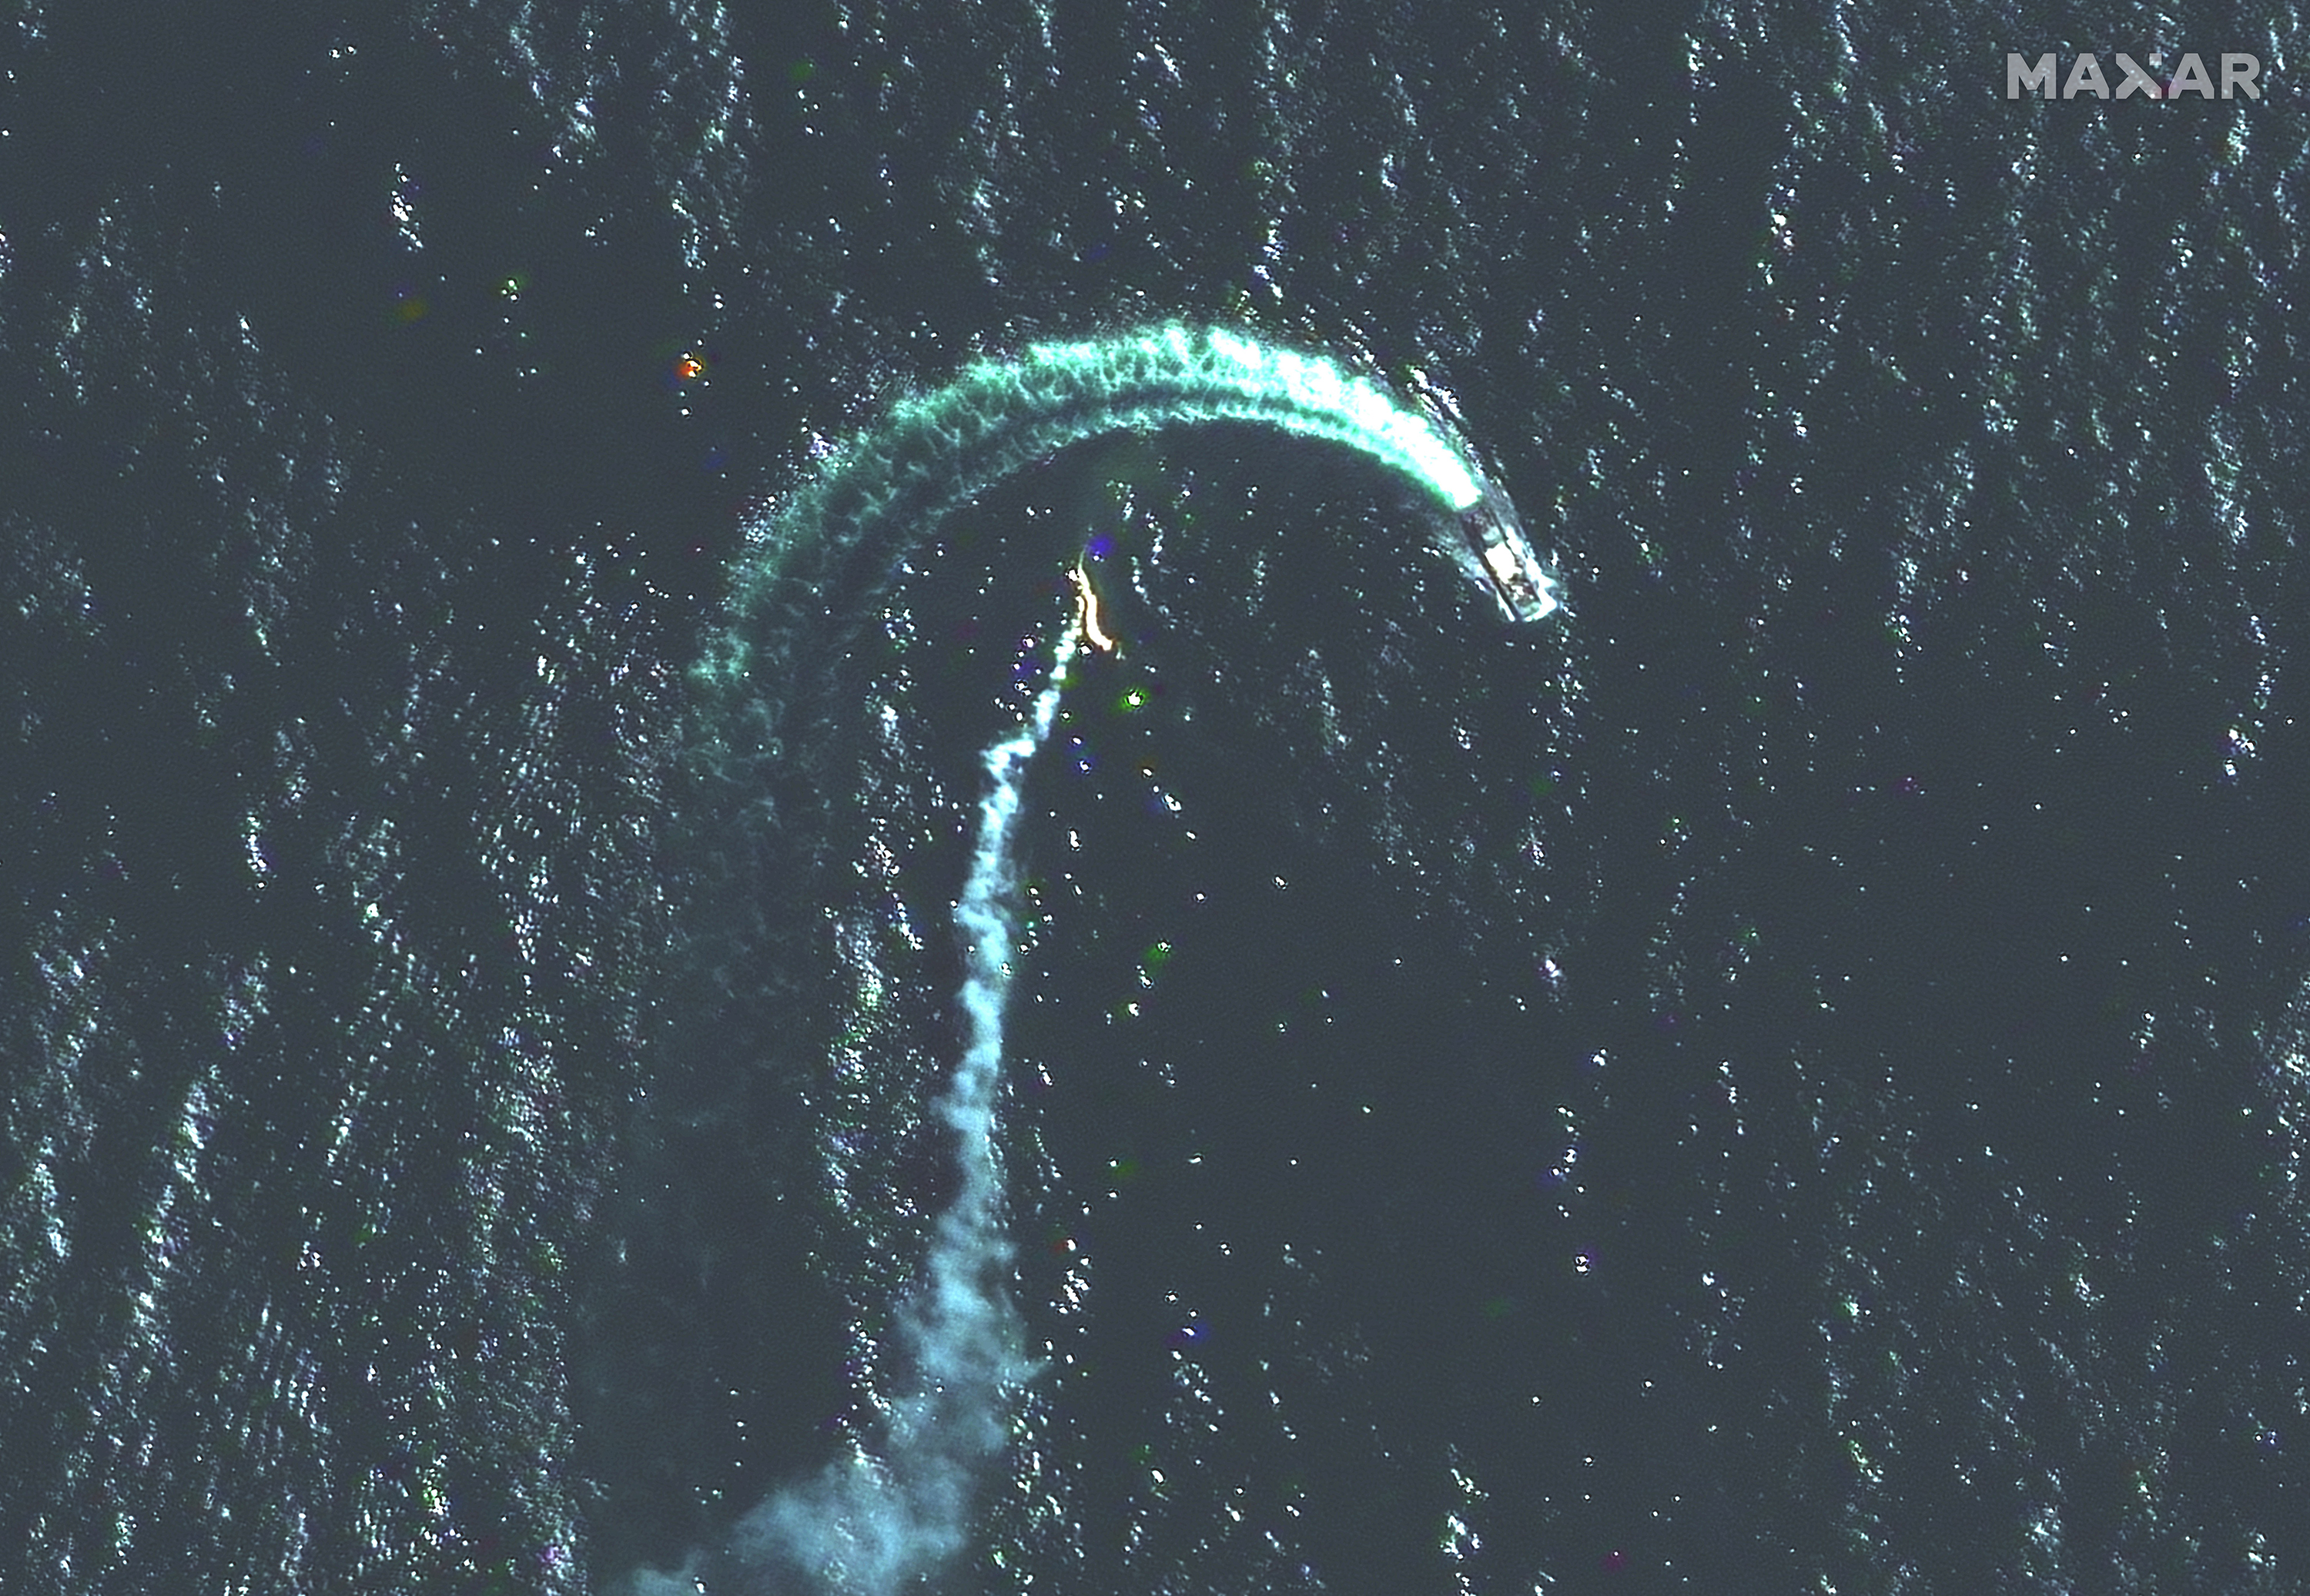 A closer view of the Serna-class landing ship, identified by Maxar, and possible missile contrail seen in a satellite image on May 12.